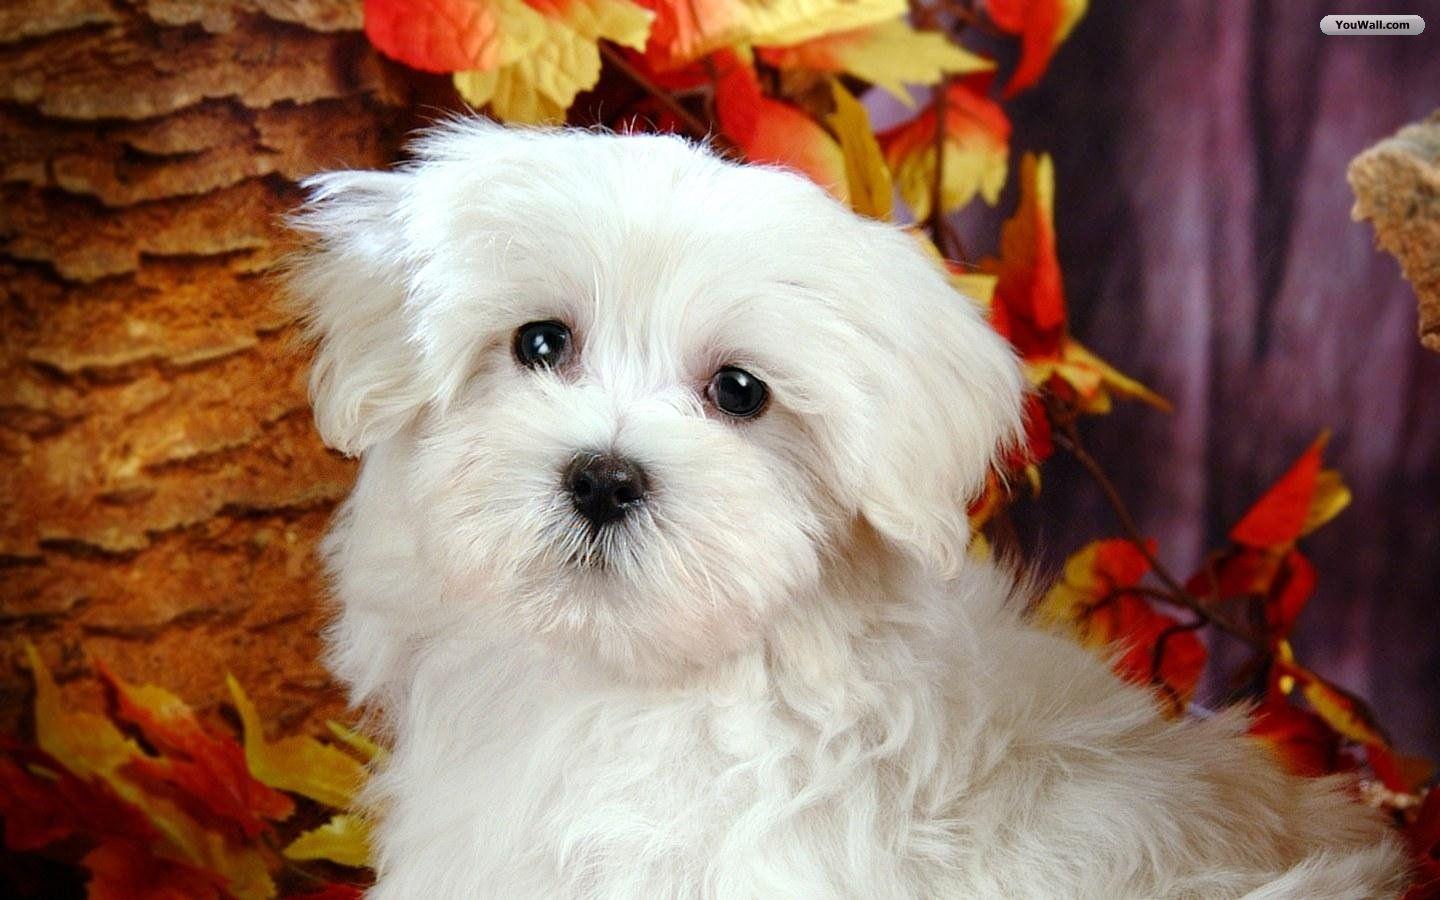 Cute White Dogs Wallpaper Image & Picture